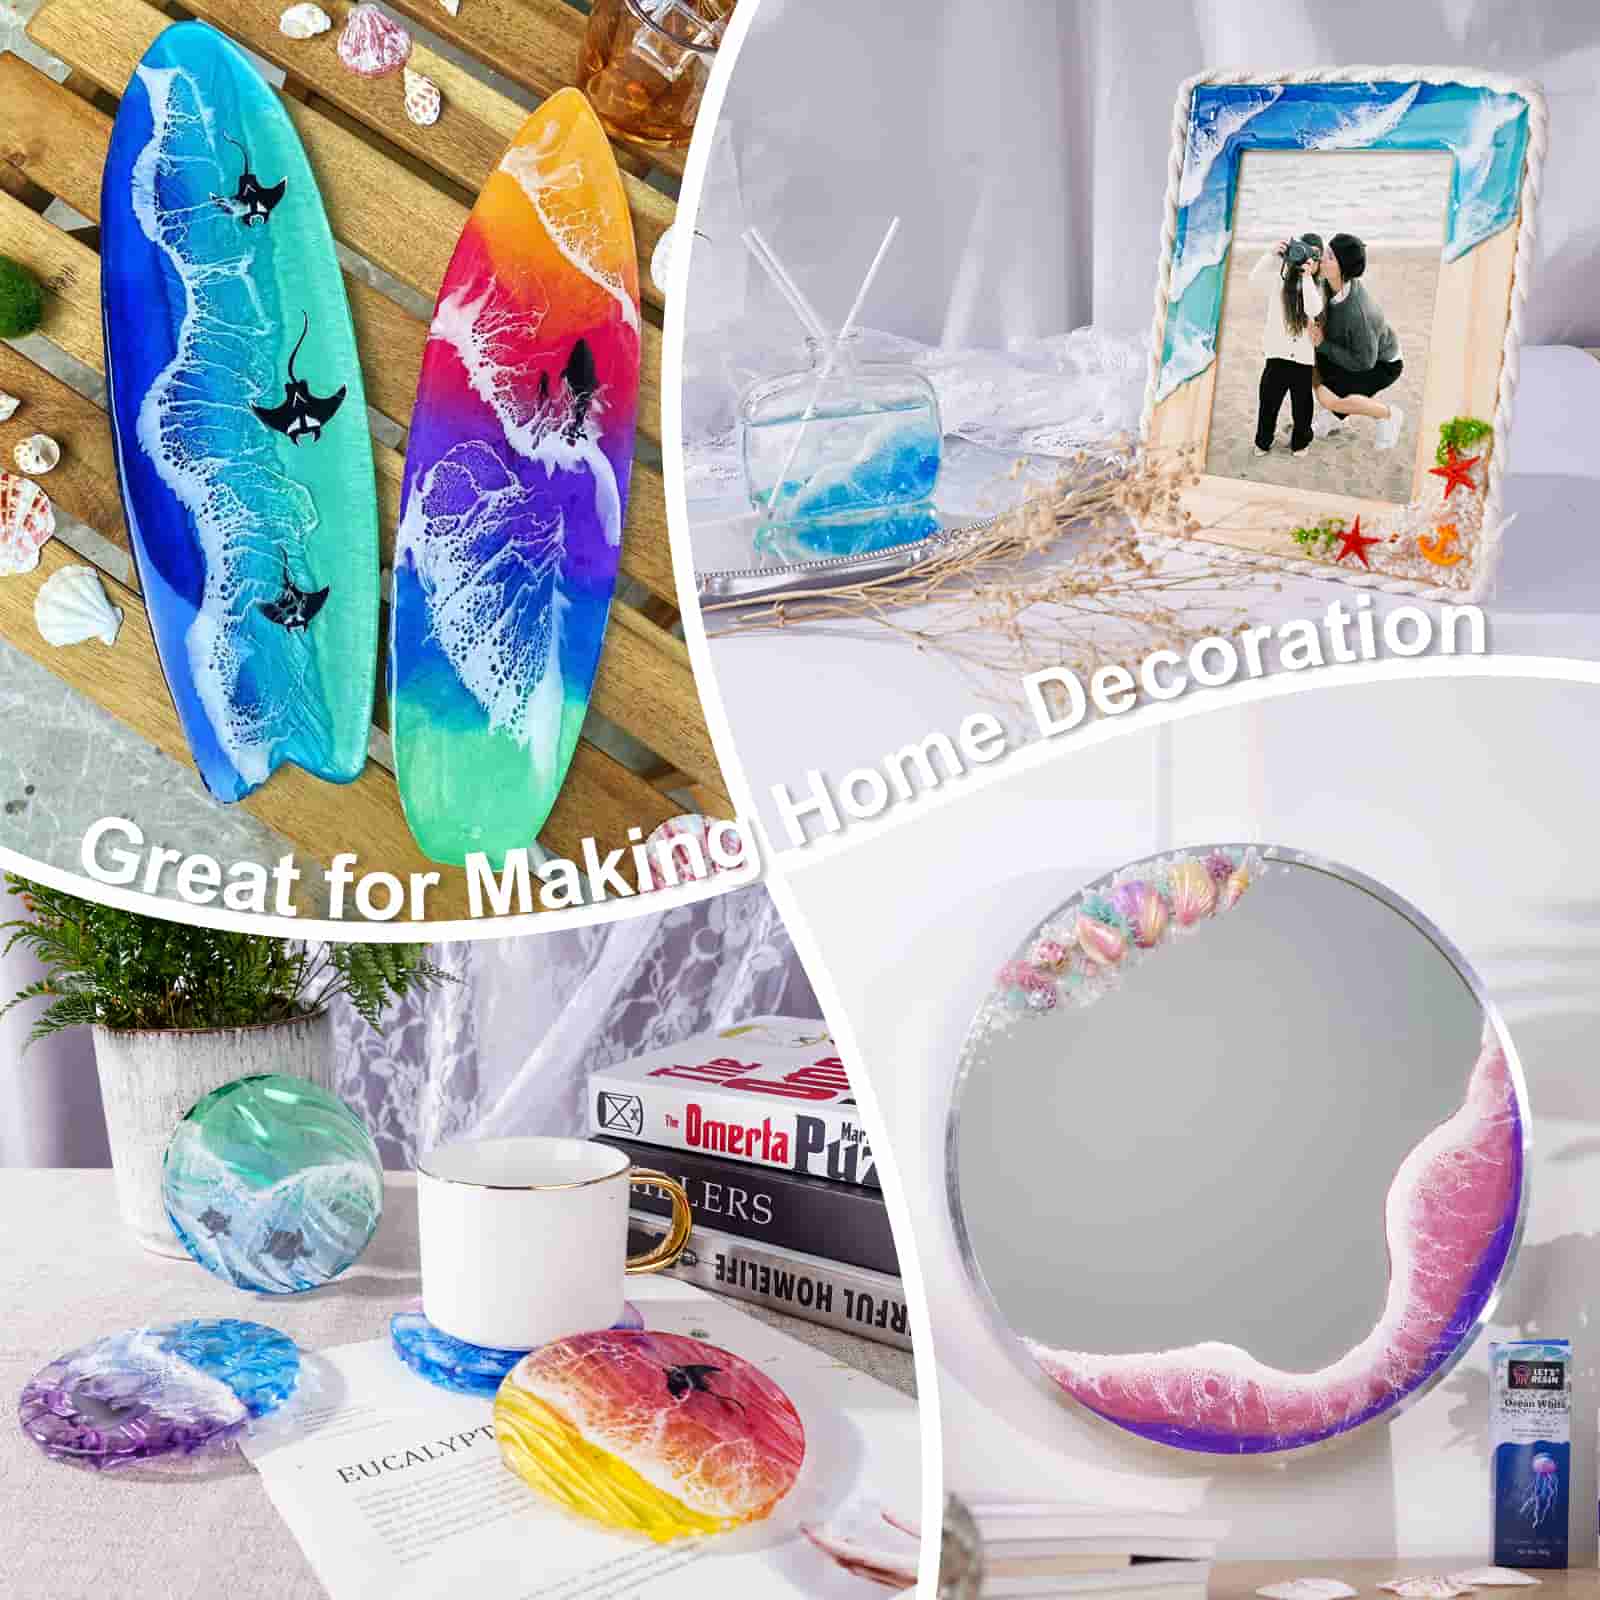 Let's Resin Ocean White Epoxy Resin Pigment, Opaque Pigment Paste, High Concentrated Color Tint for Ocean Waves Art, Dye for Resin Coloring